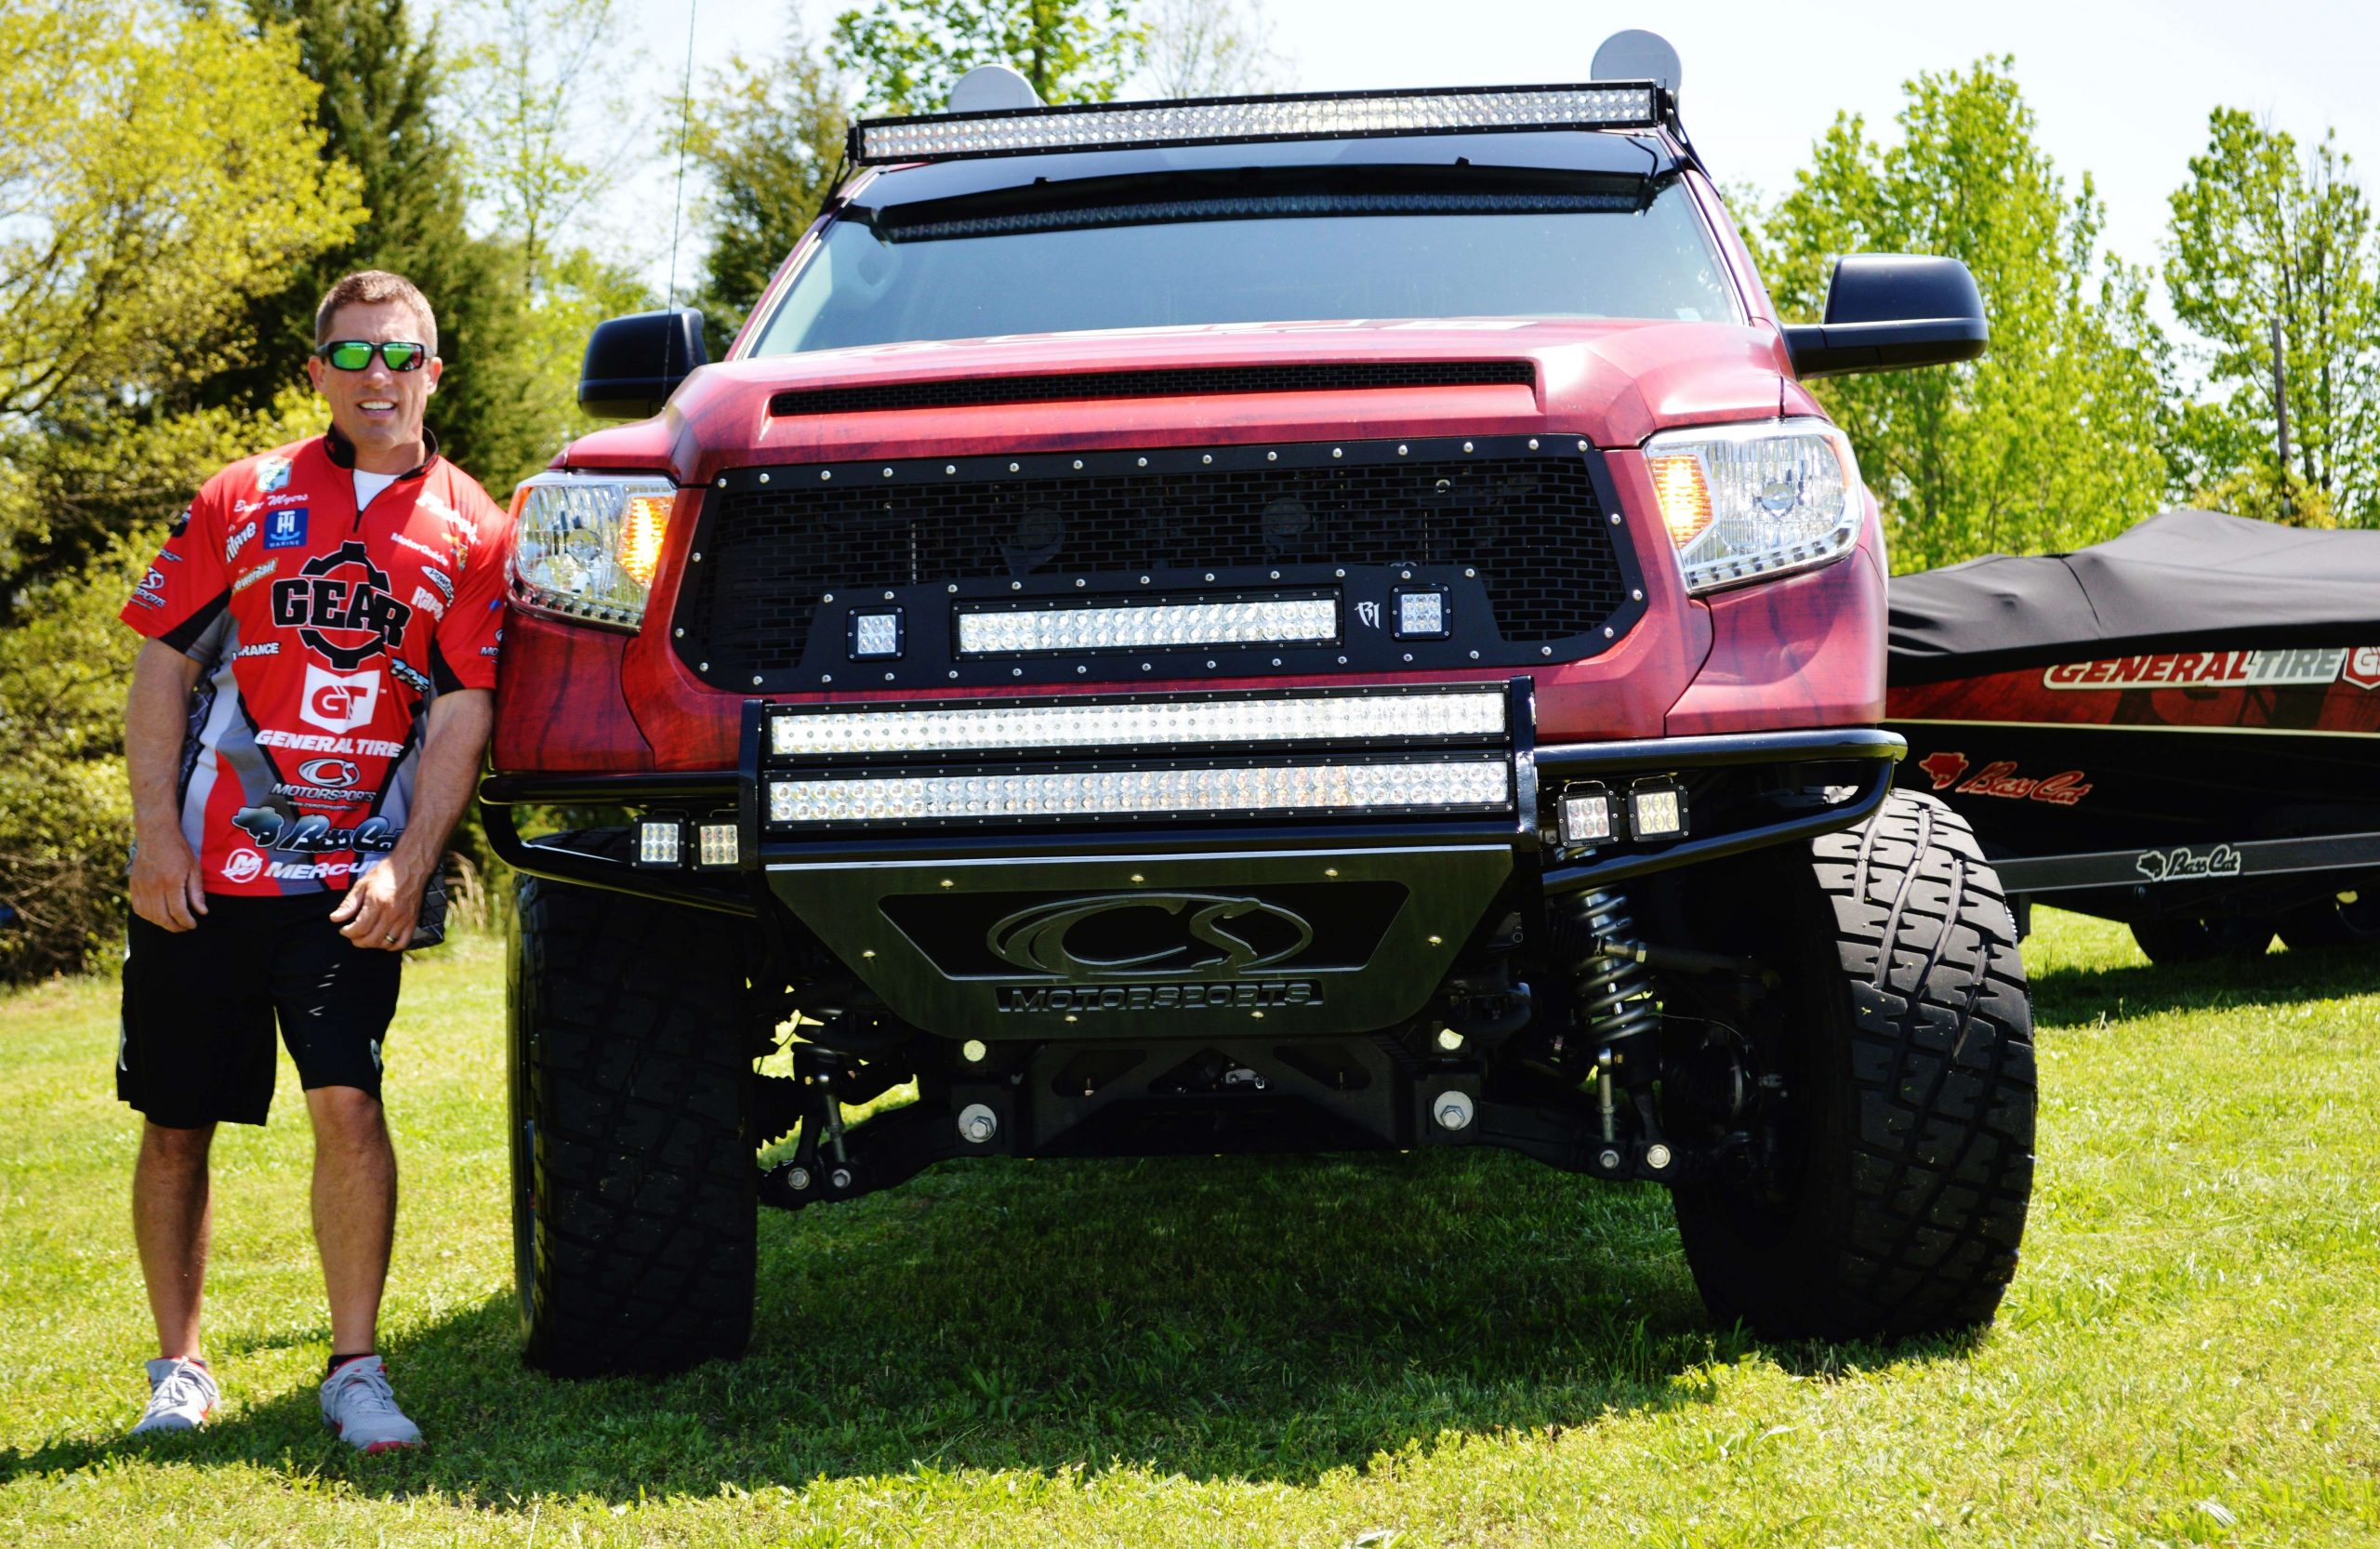 Many Elite pros turn to friend and competitor Britt Myers for help on customizing their Tundras. Located near Raleigh, NC, his CS Motorsports truck-customizing shop has turned out some truly impressive mods. 